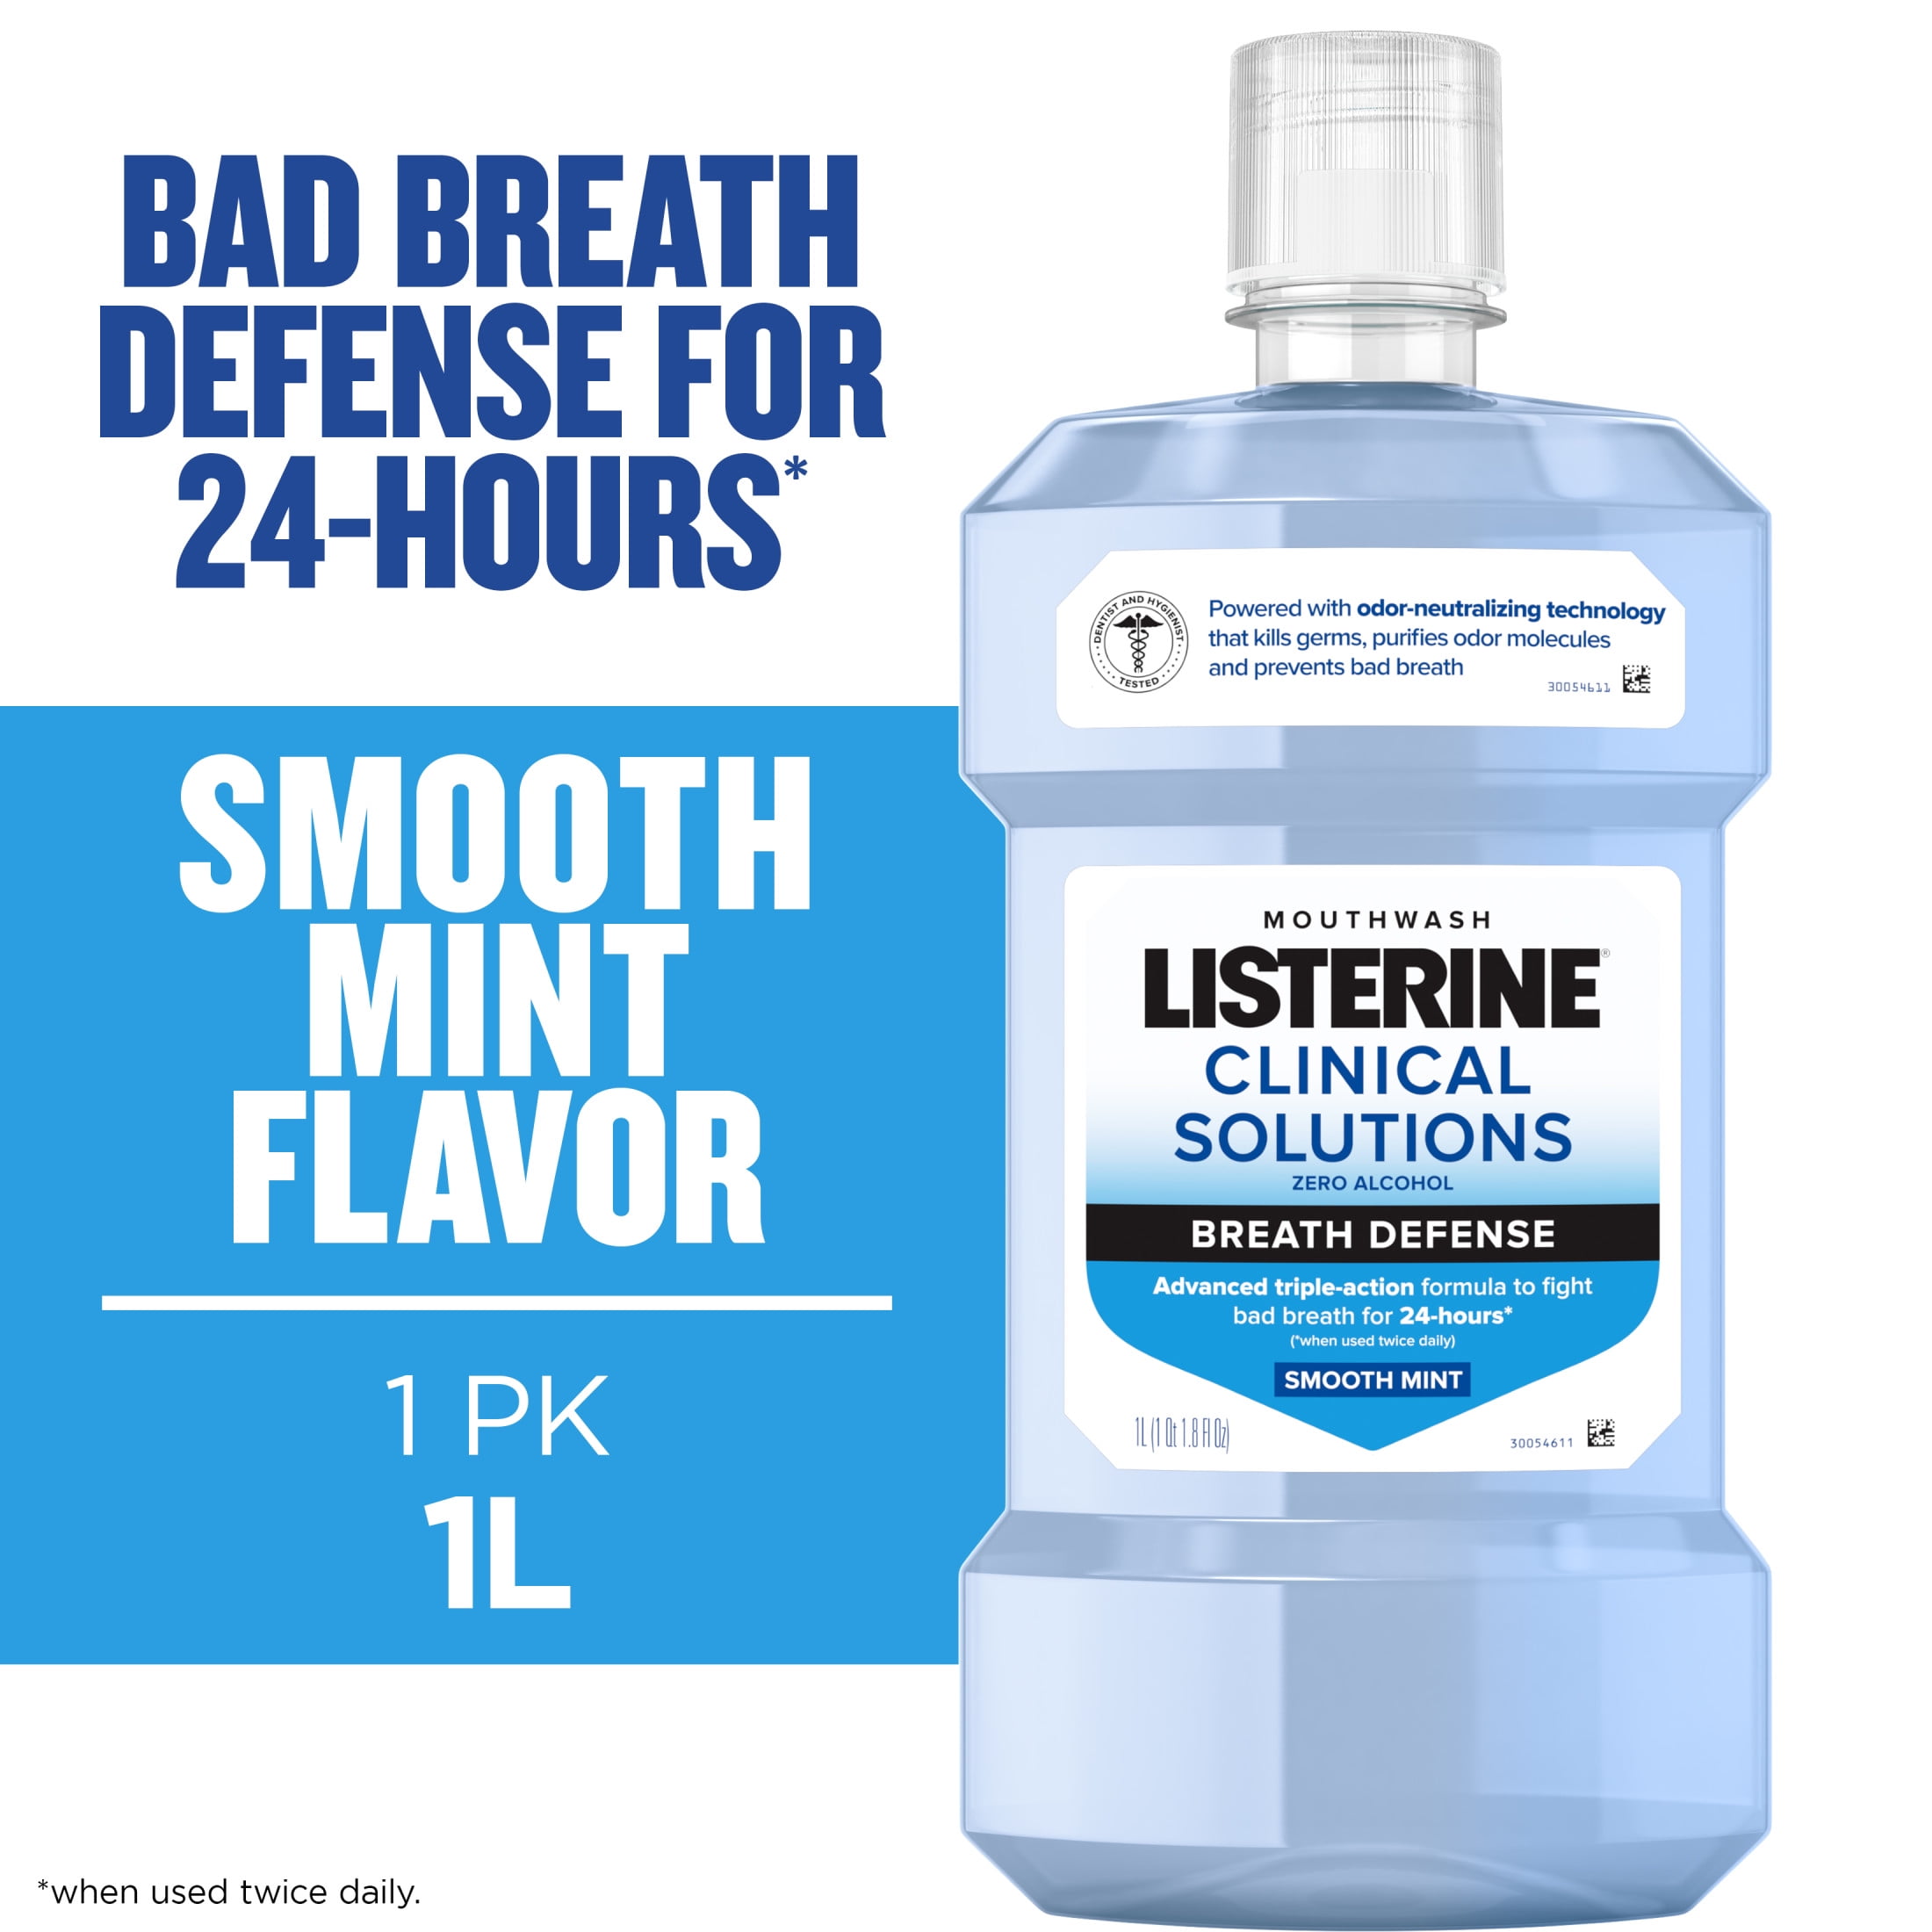 Listerine Breath Defense Alcohol-Free Mouthwash, Smooth Mint